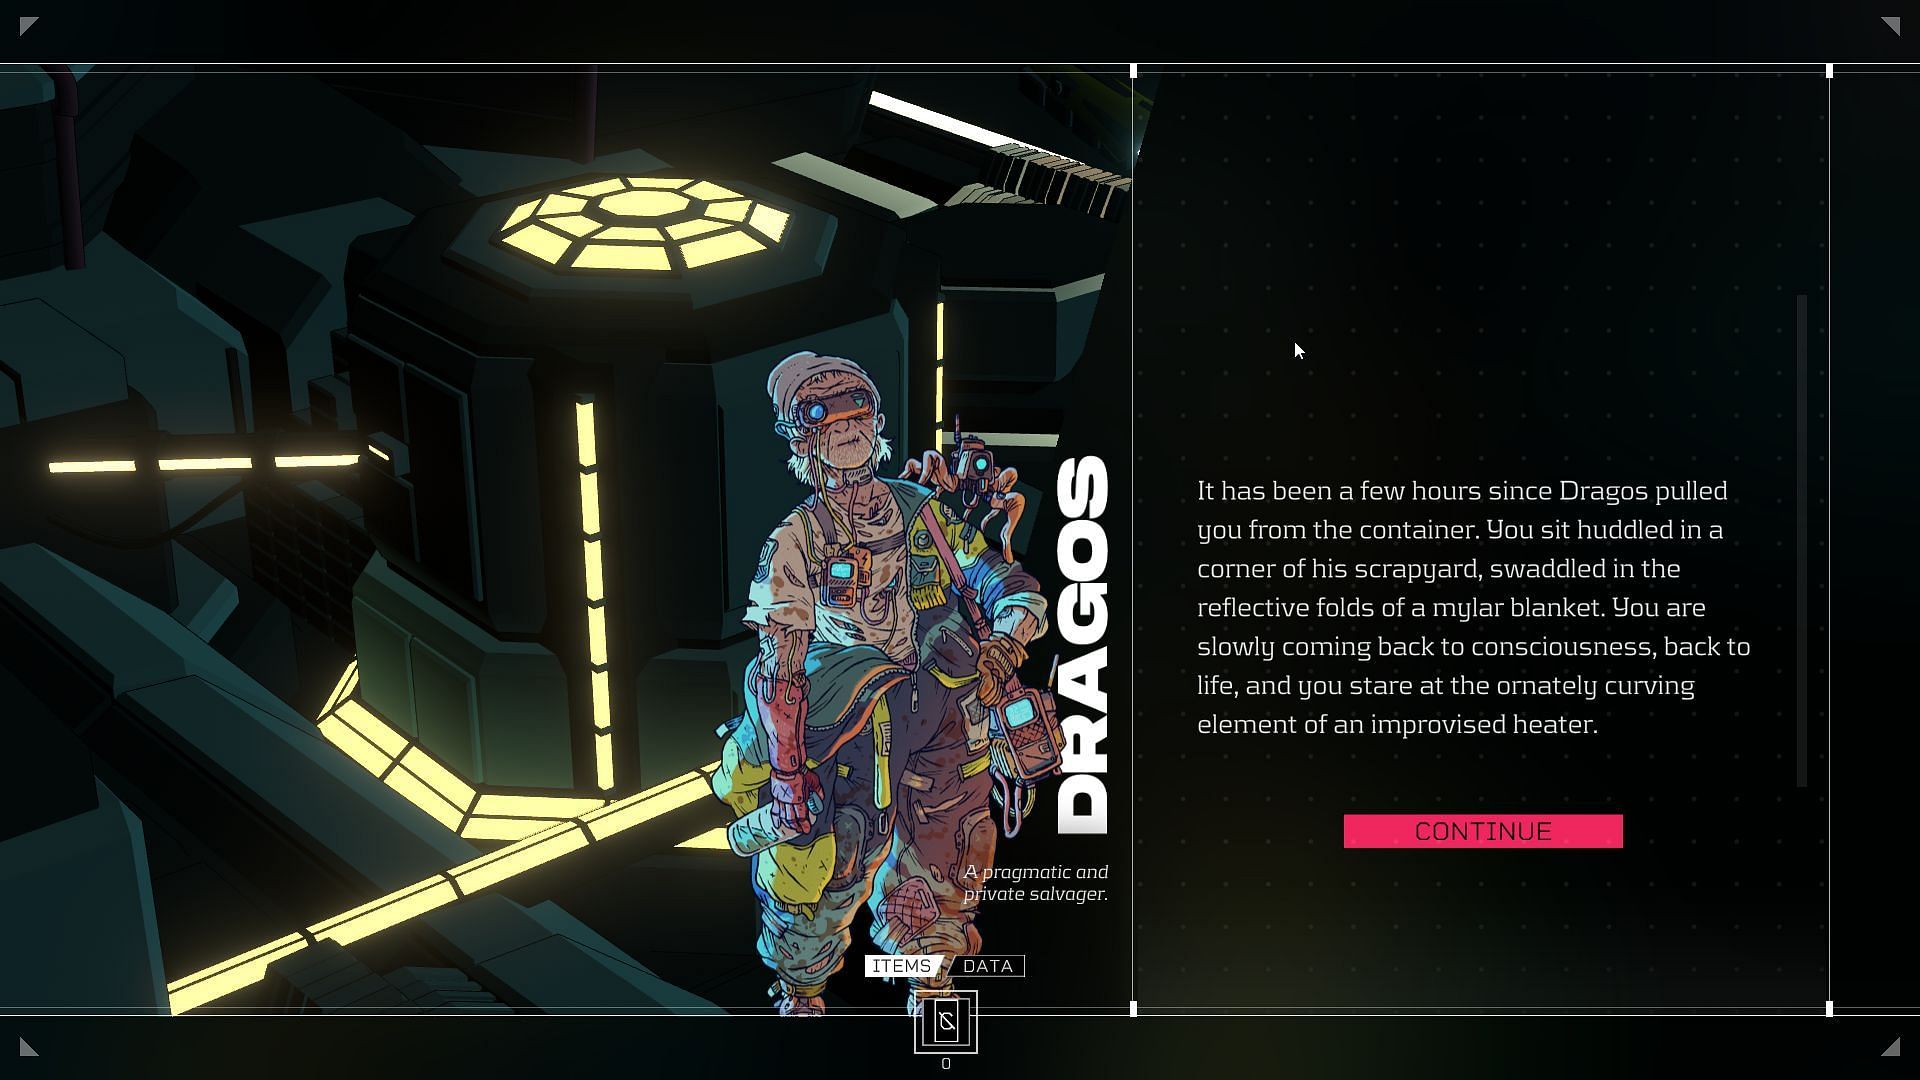 Dragos, one of the many characters players will meet in the game (Image via Citizen Sleeper)